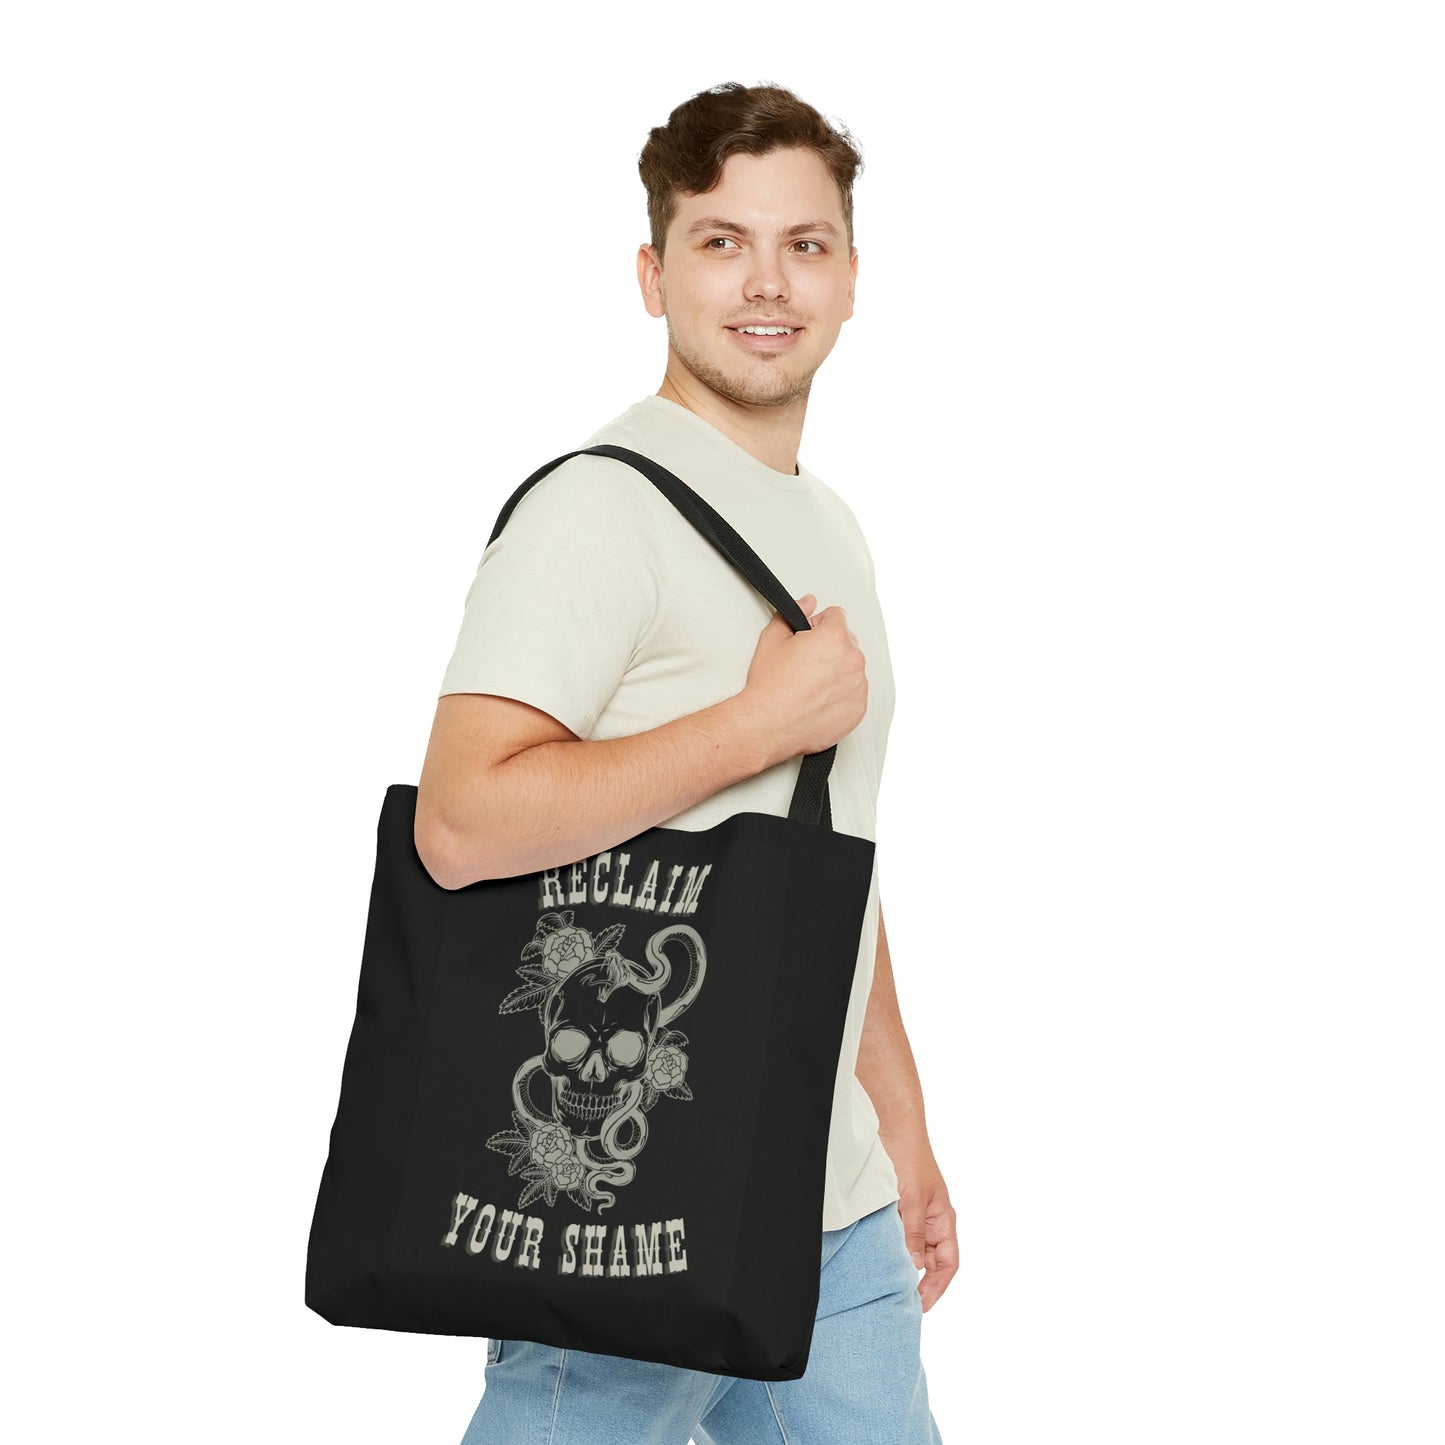 Reclaim Your Shame [Gauth Line] Tote Bag in 3 sizes